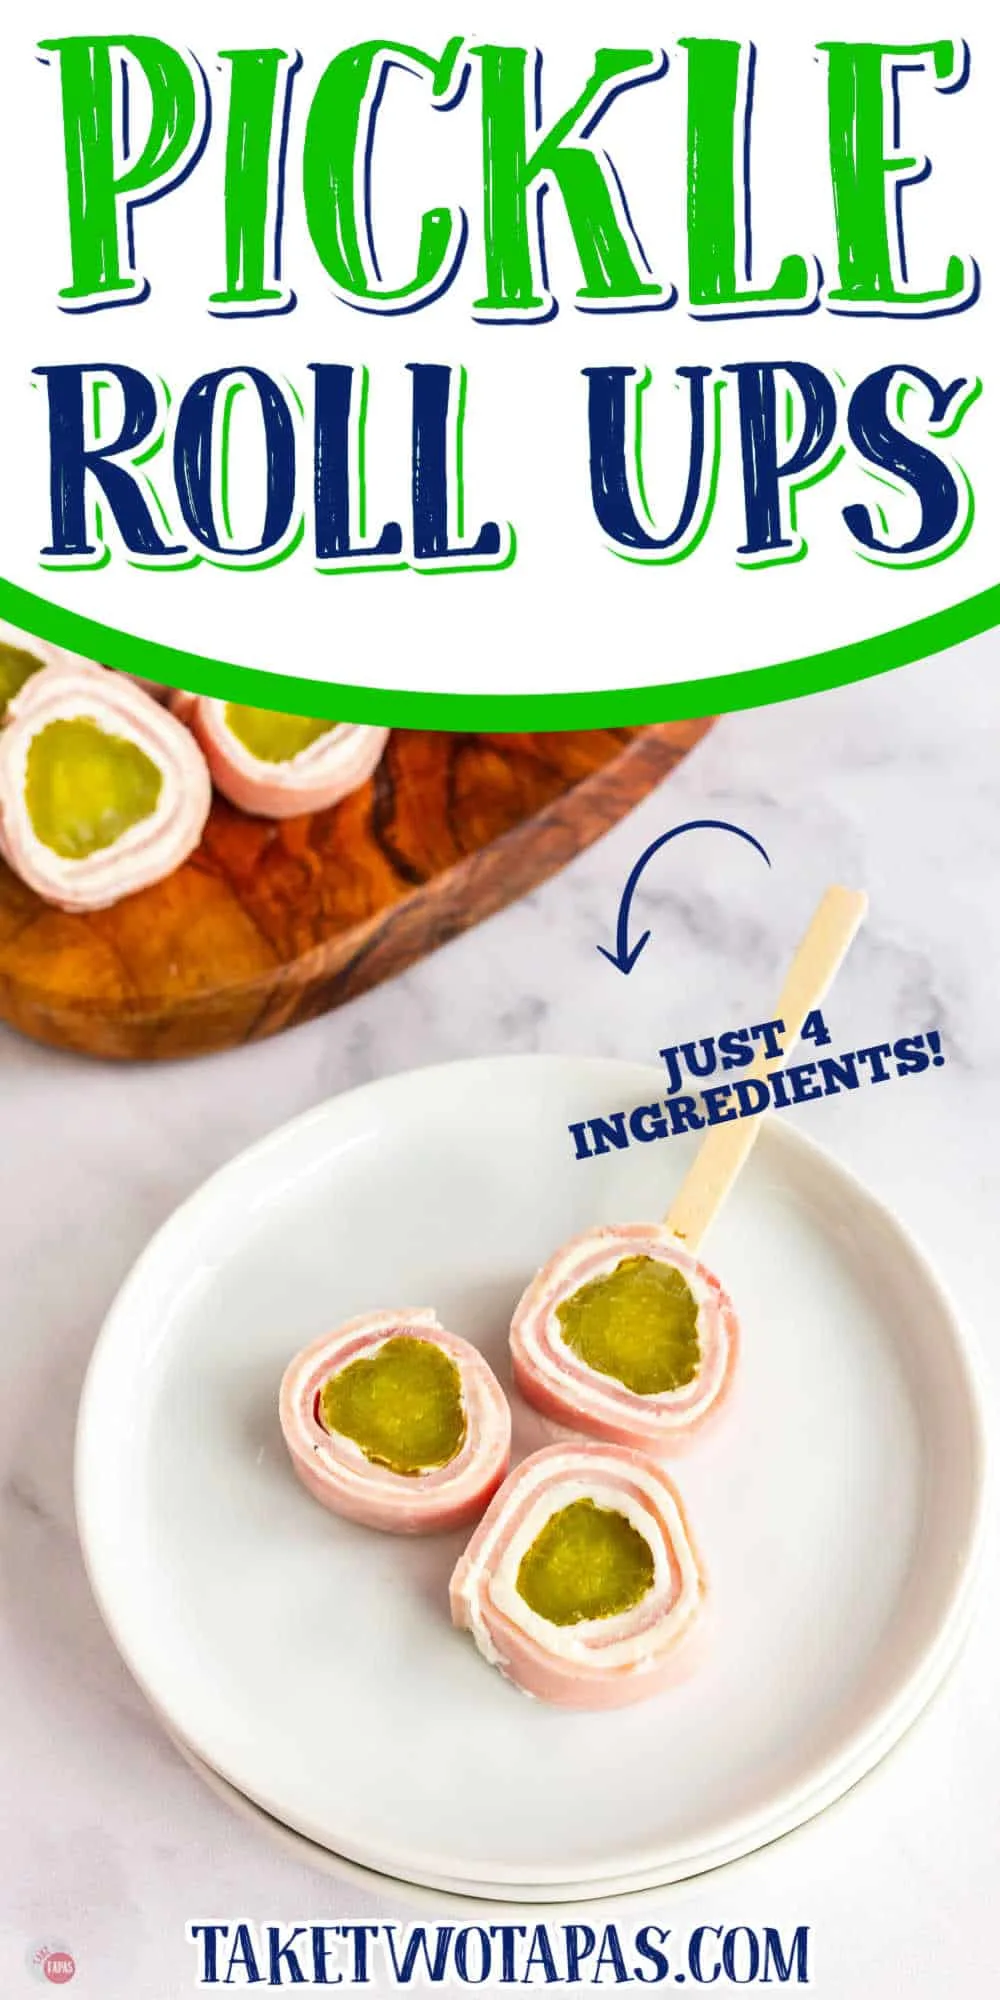 three pickle and ham roll ups with text "4 ingredients"